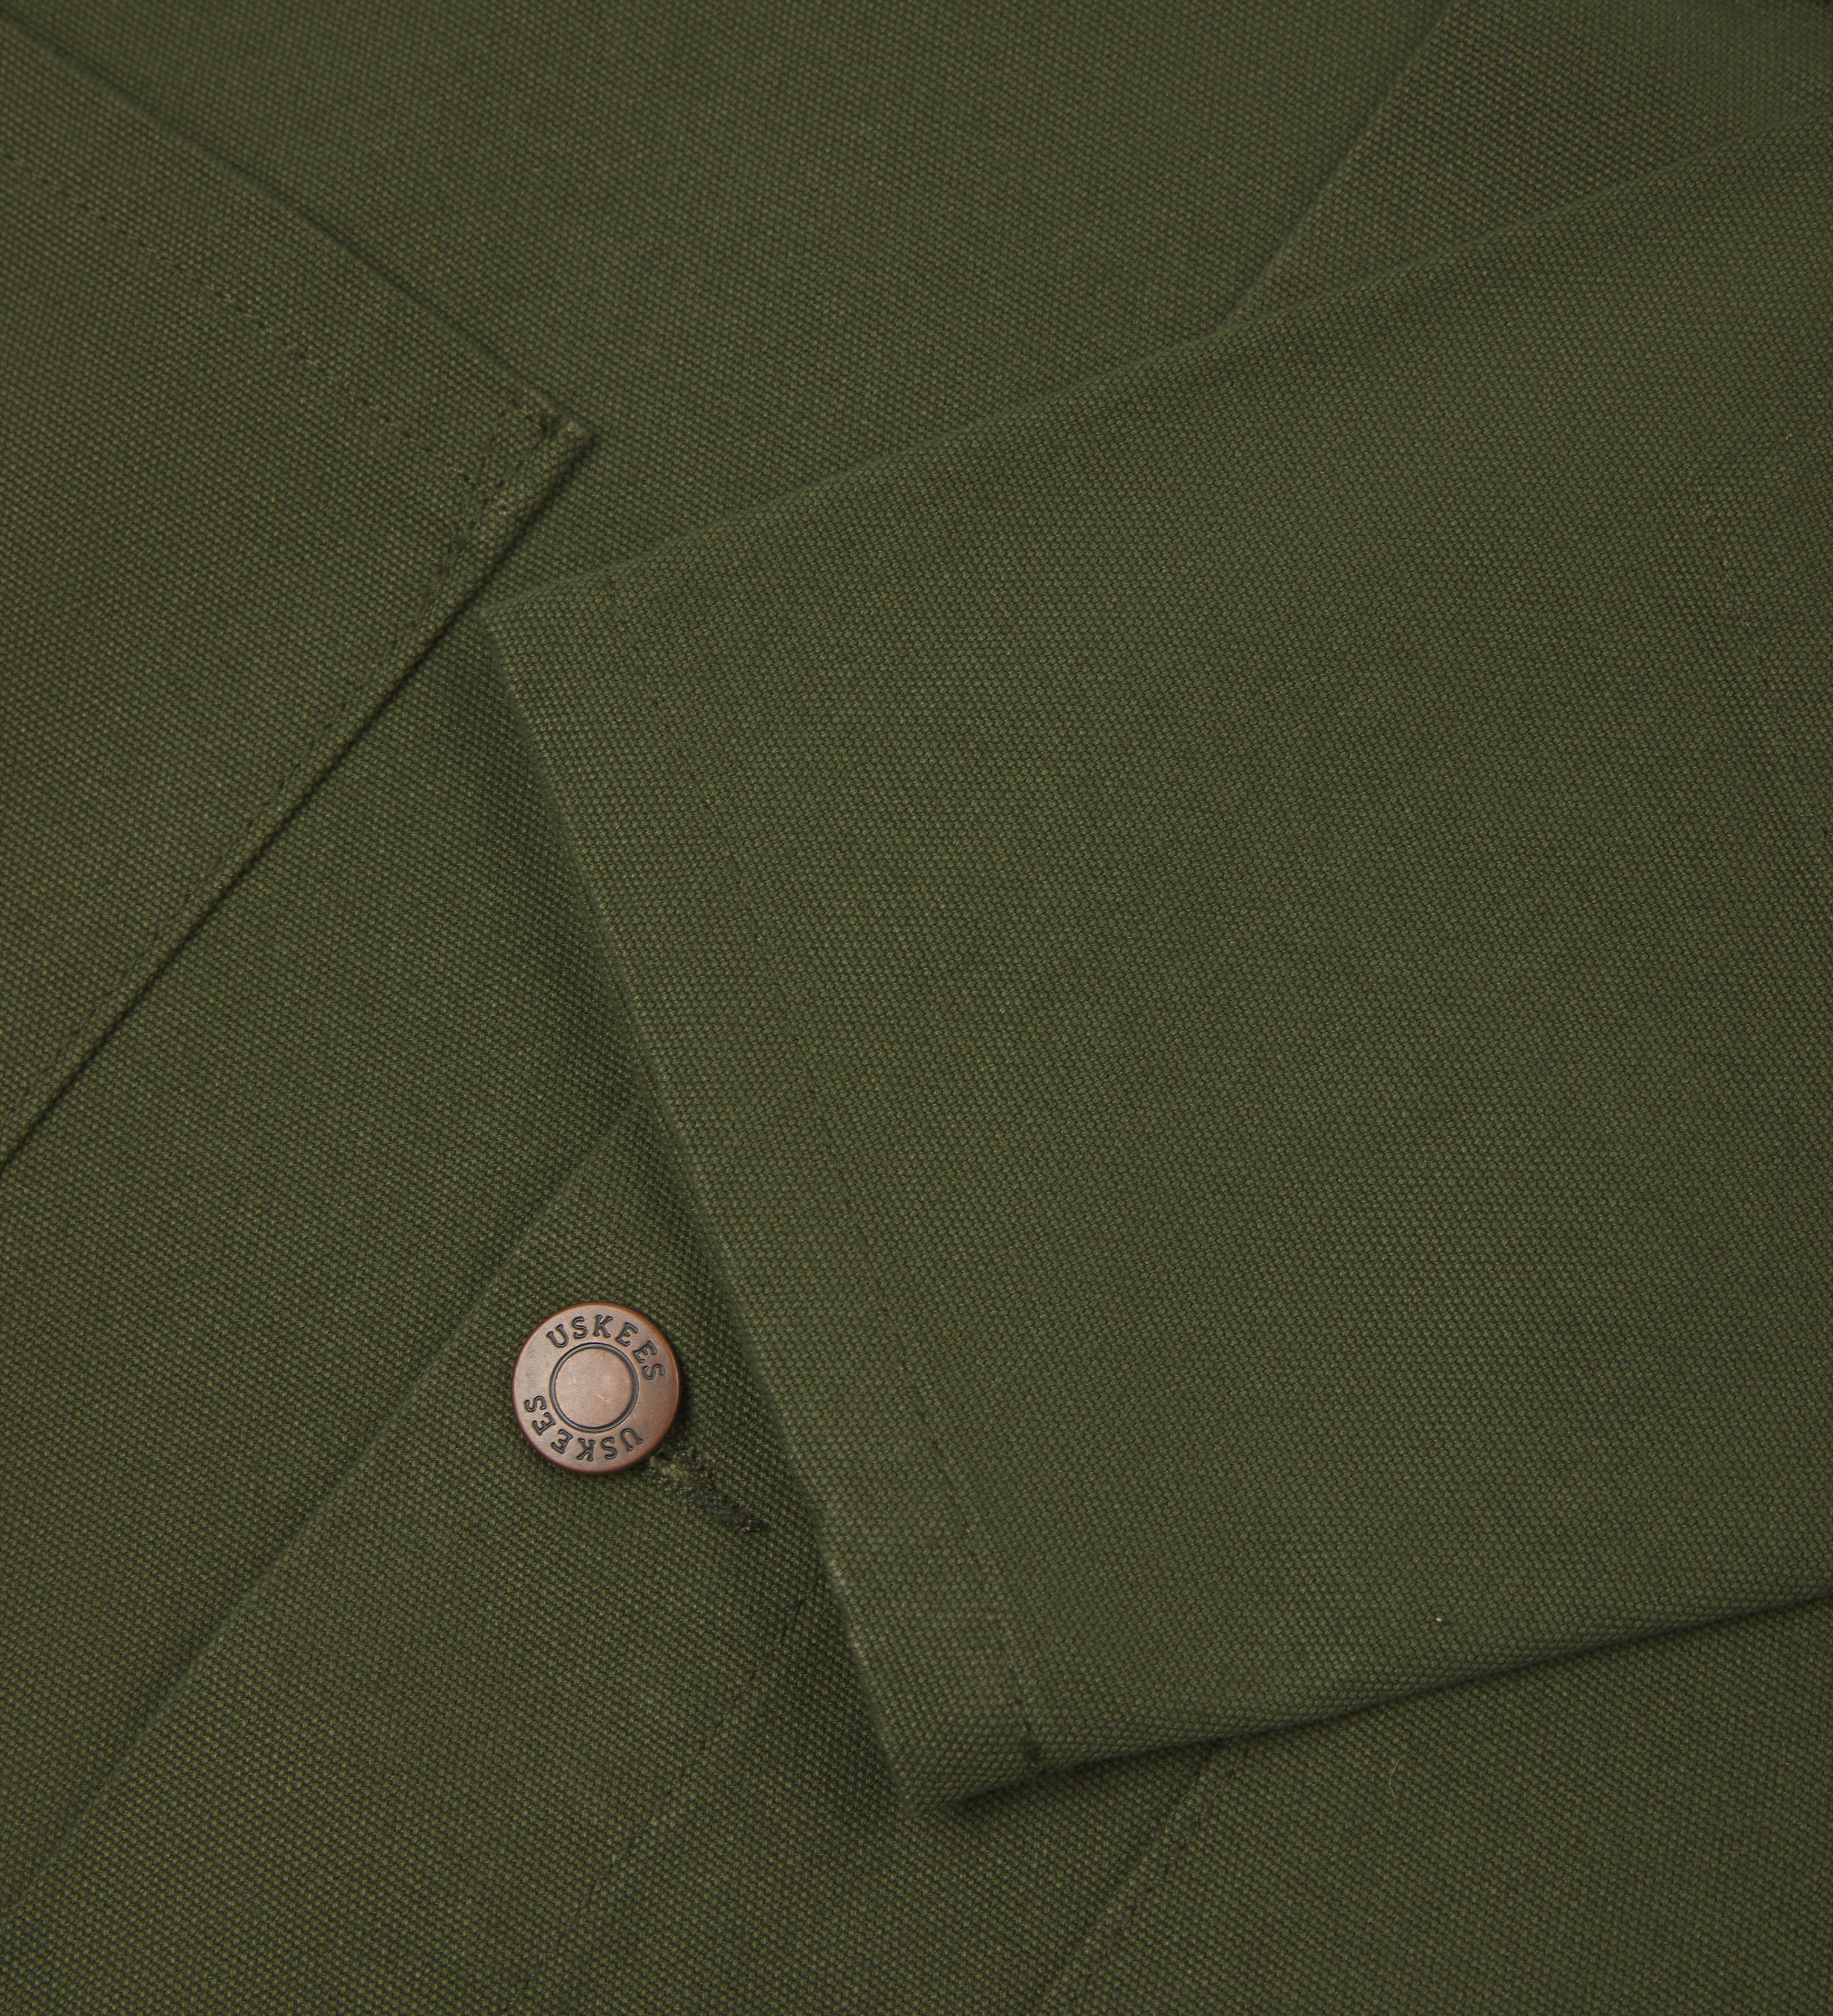 Close-up view of uskees mid-green canvas men's overshirt presented buttoned up showing the sleeve cuff.